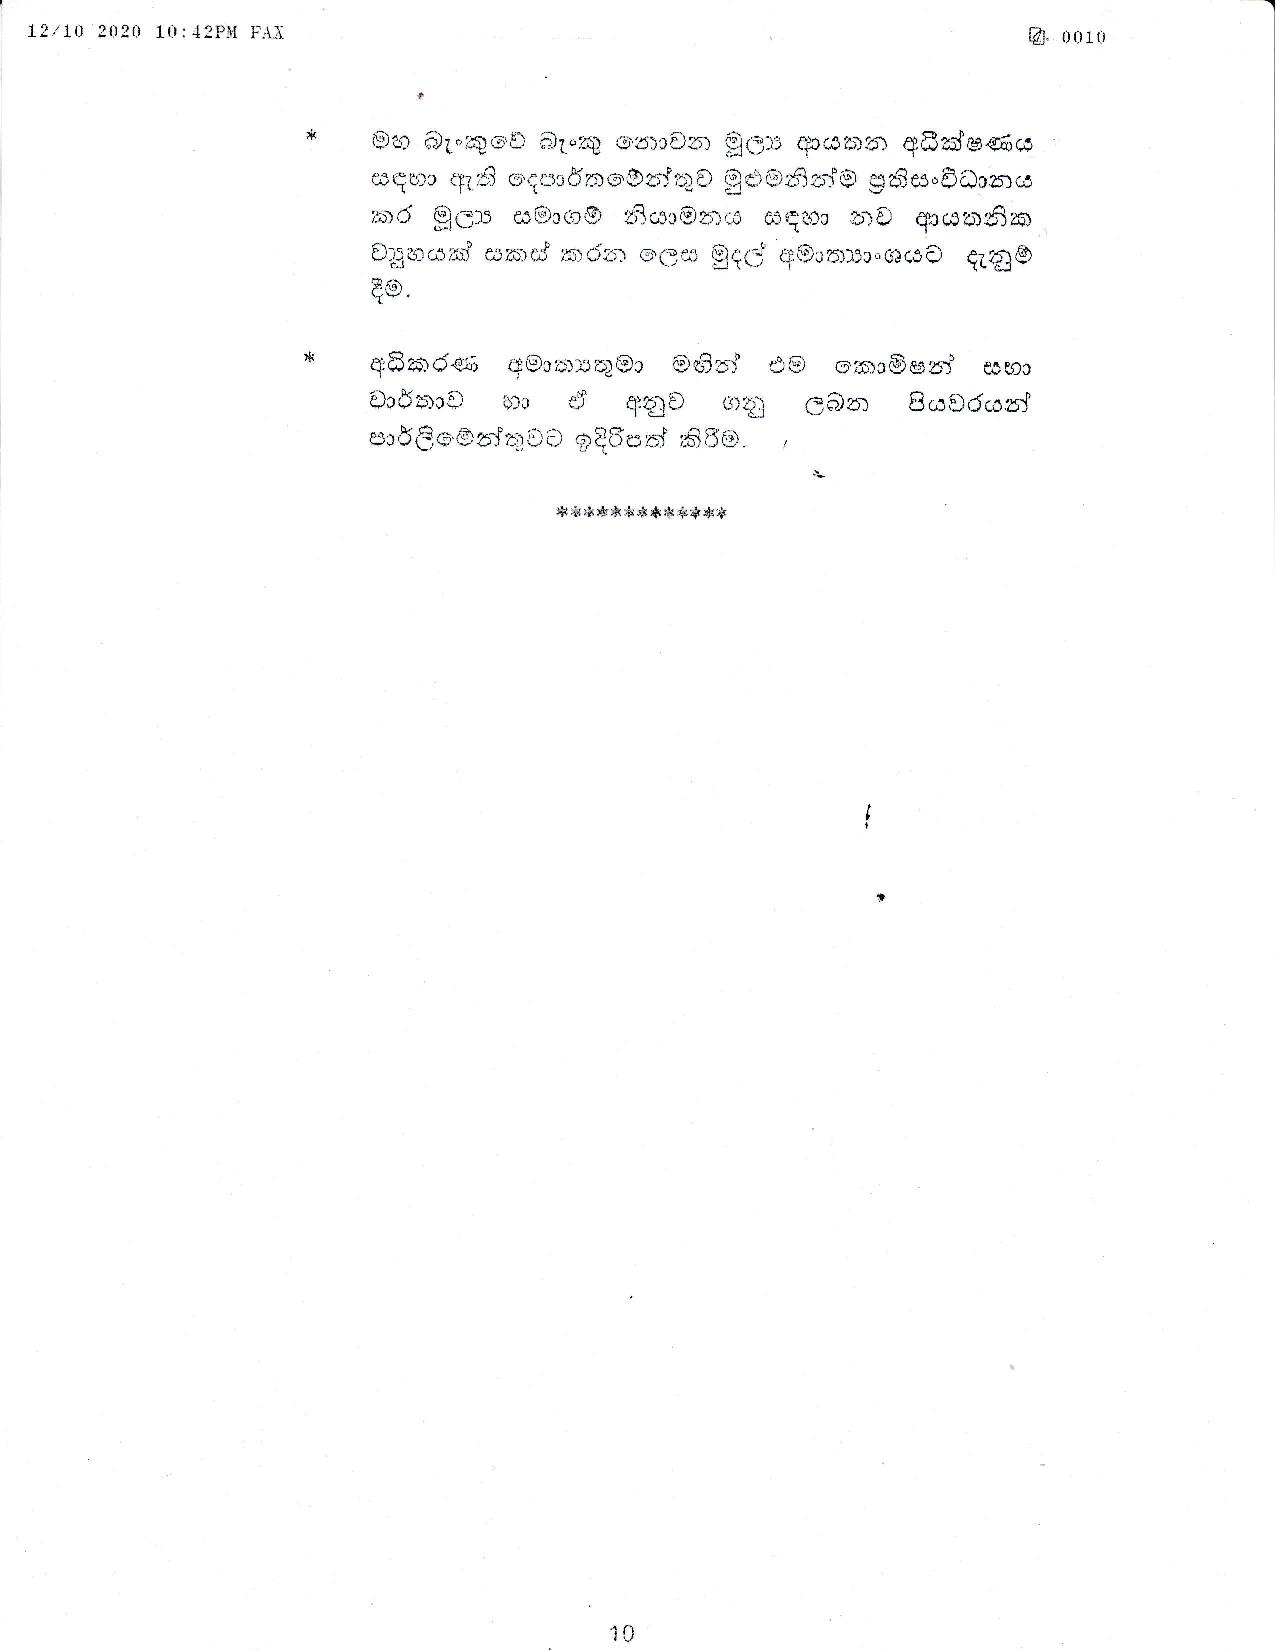 Cabinet Decision on 12.10.2020 page 010